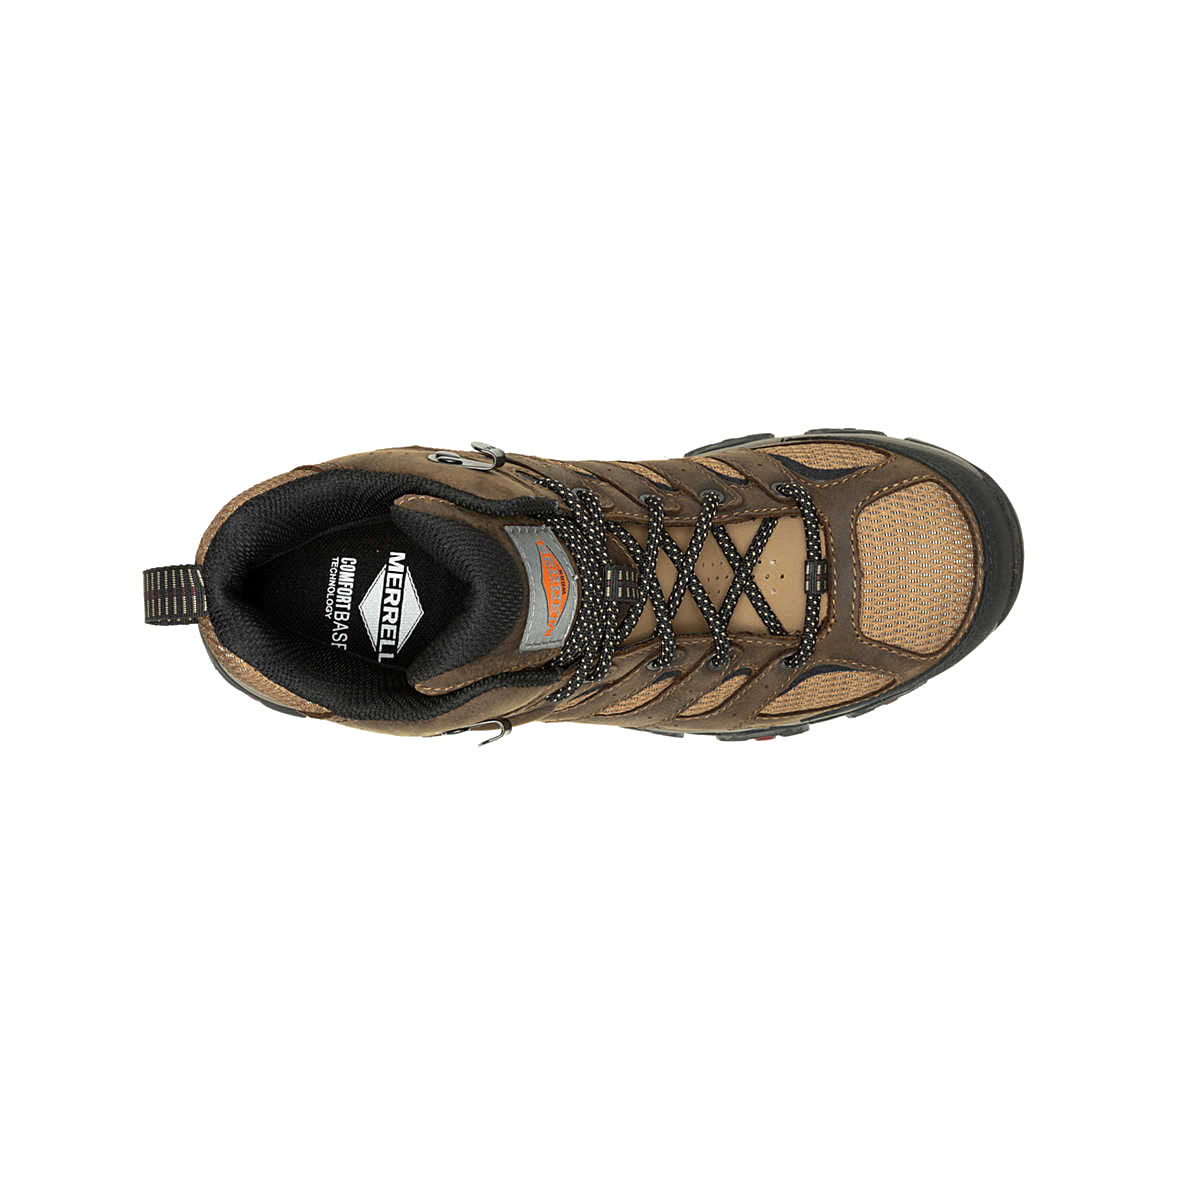 Top view of a brown Merrell Moab Vertex 2 Mid hiking boot with black and orange details, displaying laces and a Carbon Fiber safety toe with a mesh upper design.